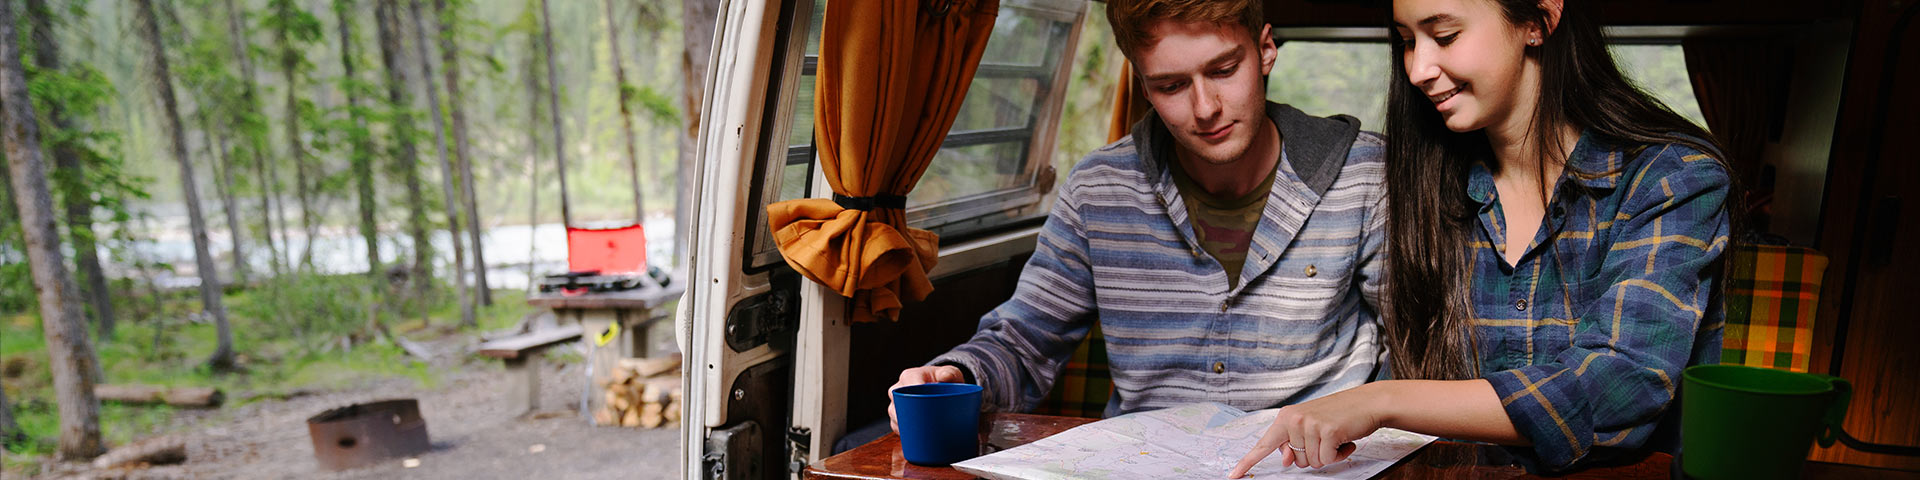 A couple inside a campervan look at a map